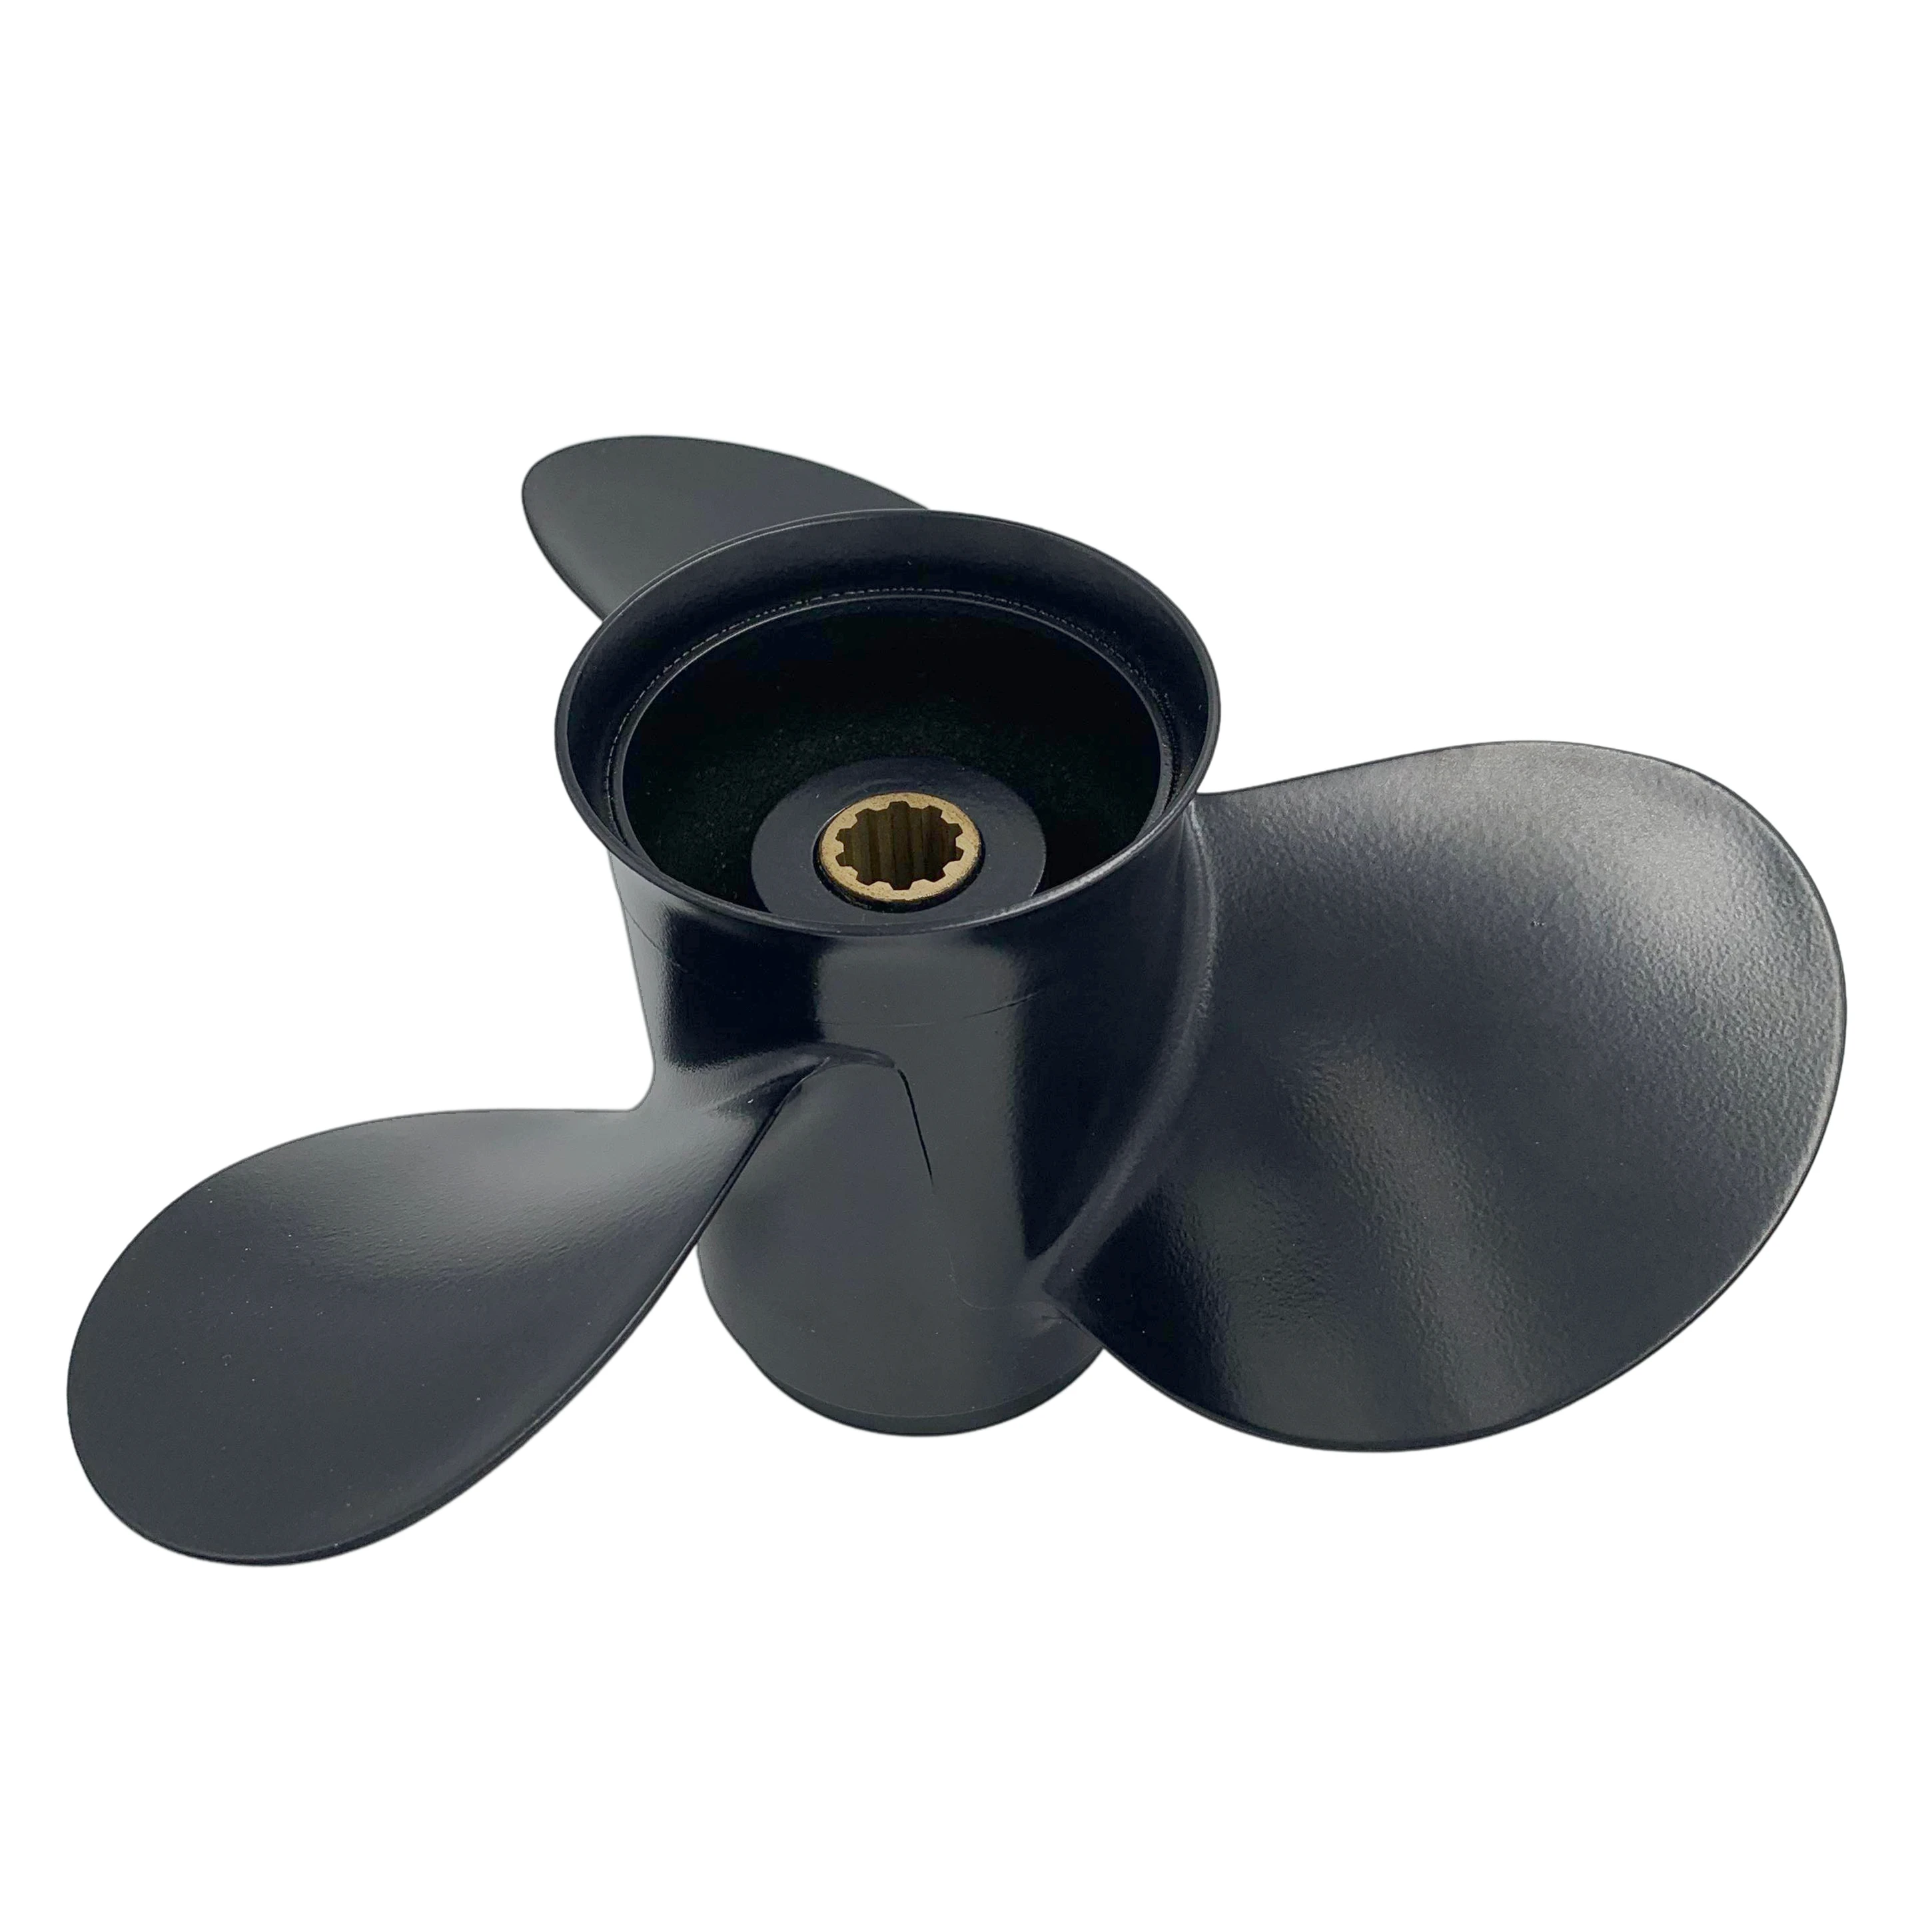 Boat Propeller 9.8x9 Fit for Tohatsu Outboard 20HP-30HP 3 Blades Aluminum Prop 10 Tooth Propel RH OEM NO: 3R0B64518-0 9.8x9 boat propeller 7 1 2x7 fit for suzuki outboard dt5 6 3 blades aluminum prop 10 tooth propel rh oem no 58111 98651 019 7 5x7